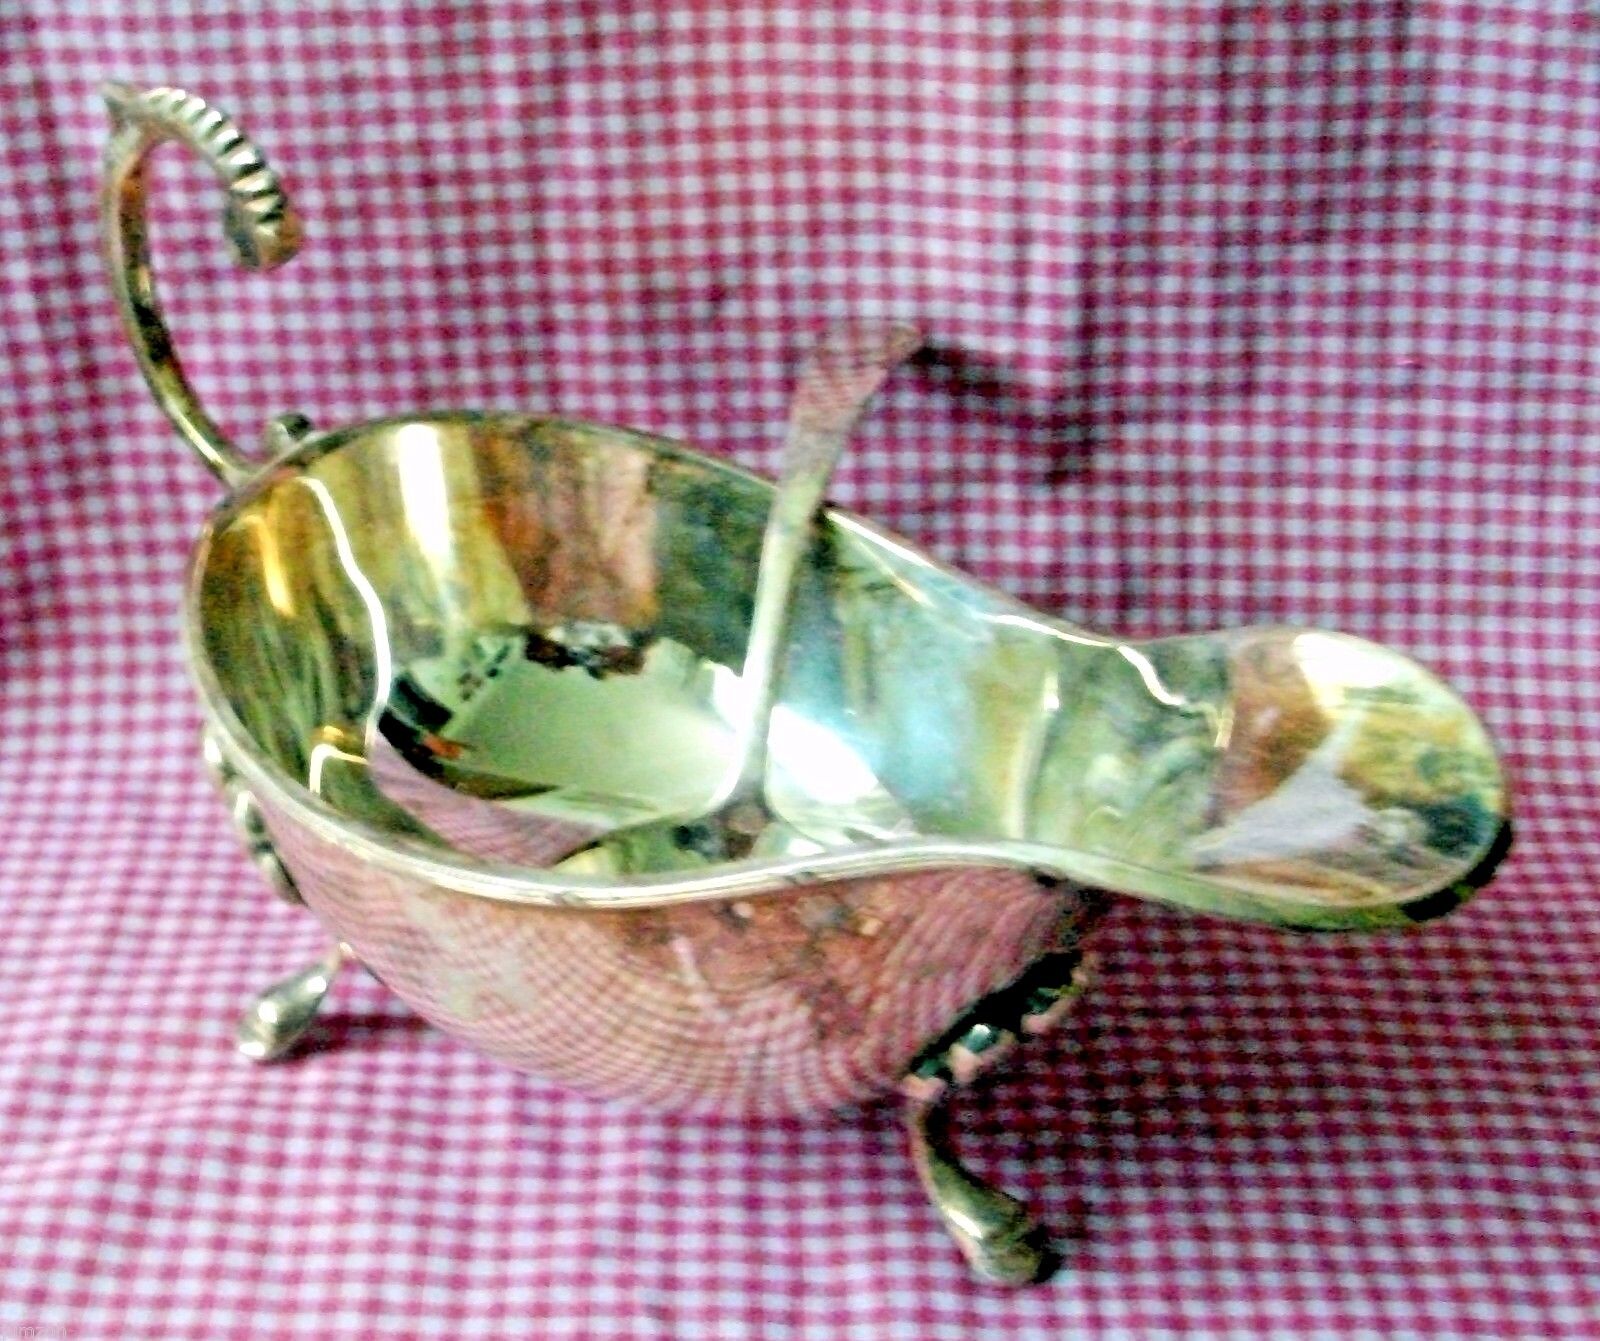 Vintage Silver Plated Gravy/Sauce Boat with footed Base + ladle spoon